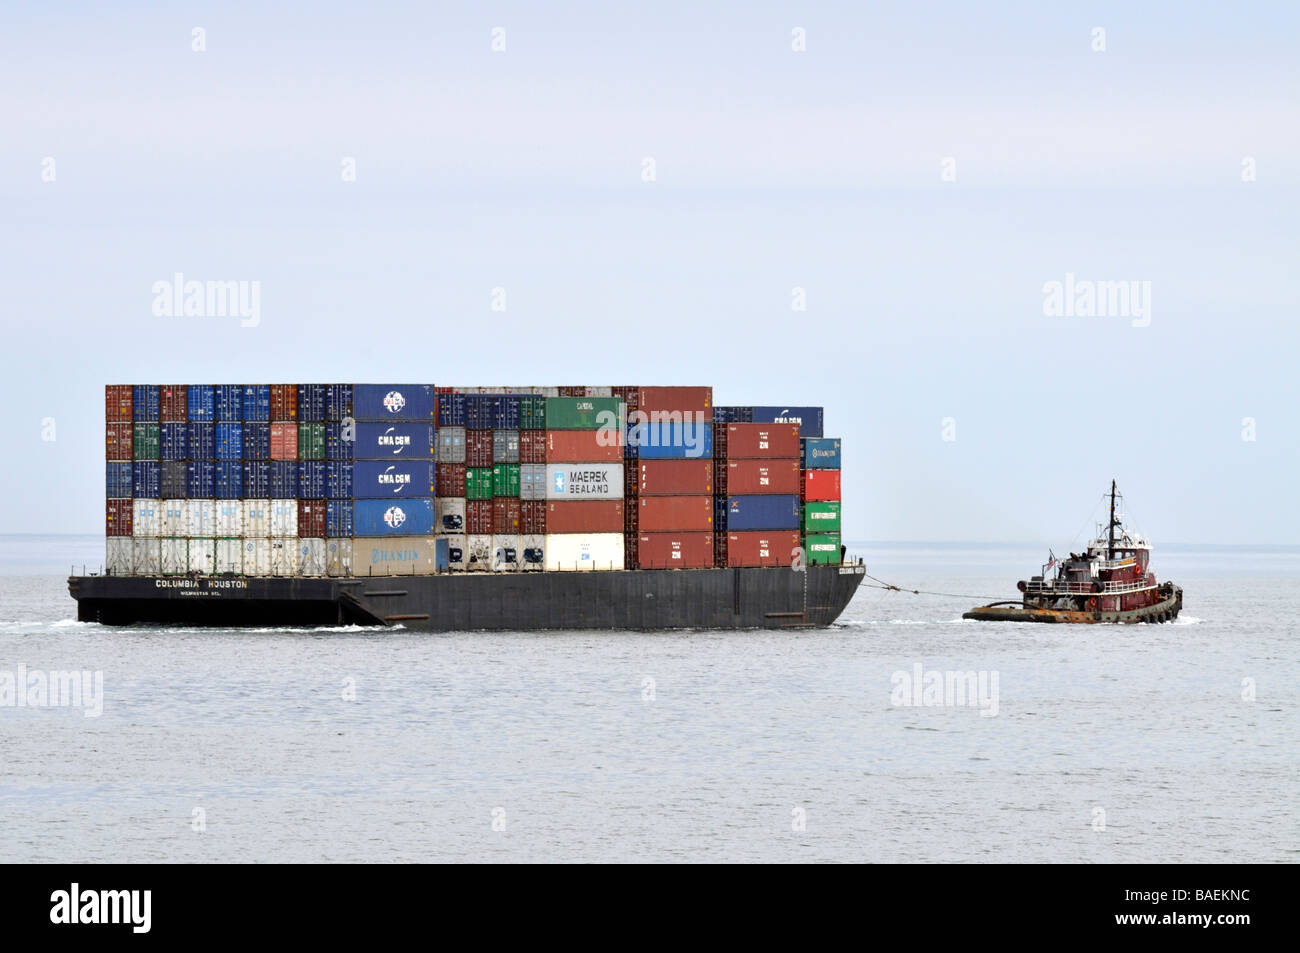 Tugboat pulling barge loaded with shipping containers at sea Stock Photo